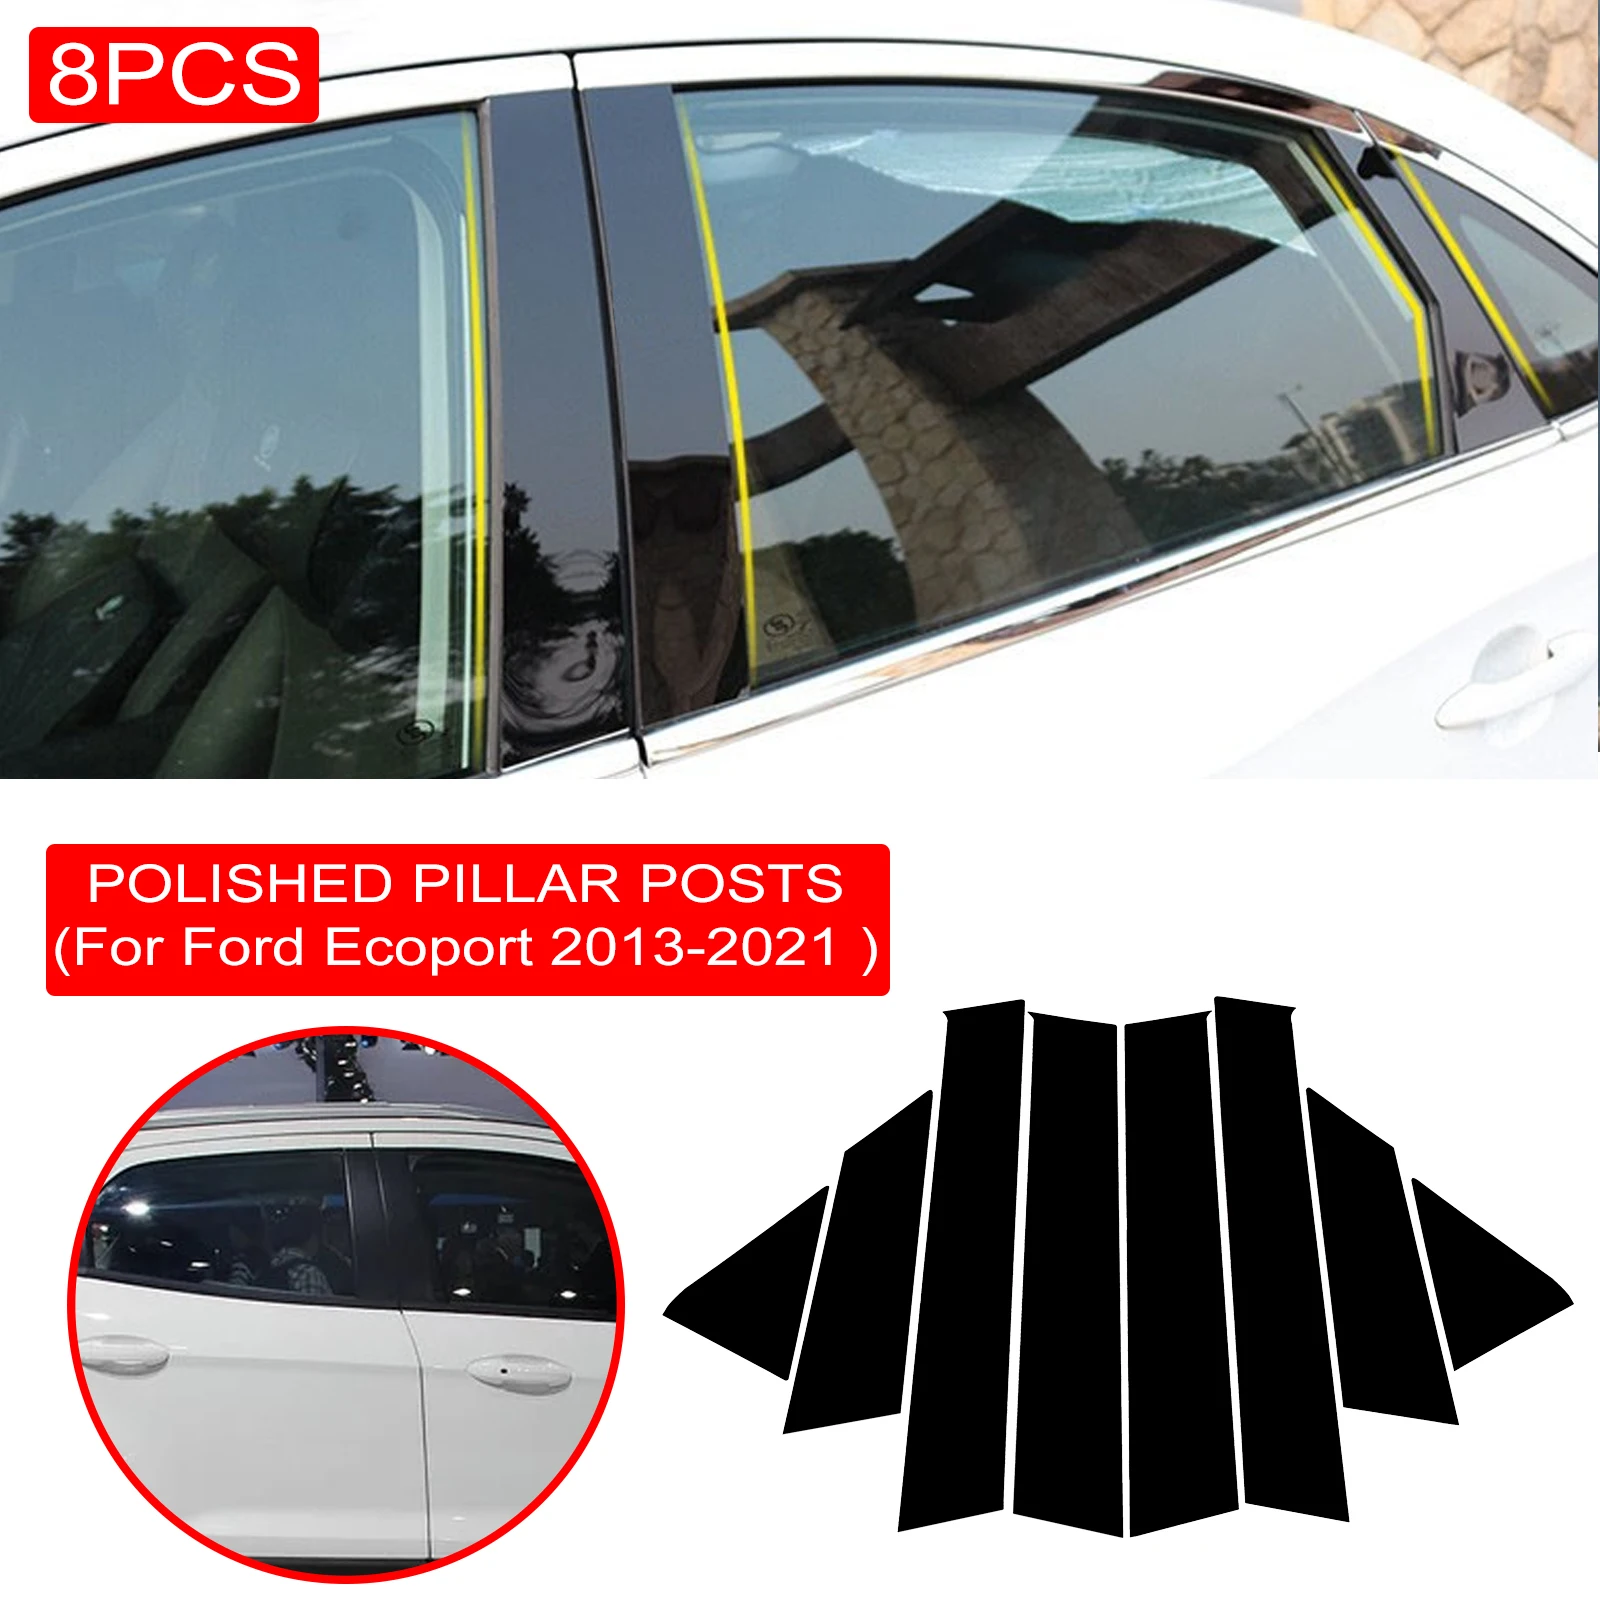 

8PCS Polished Pillar Posts Fit For Ford Ecosport 2013-2021 Window Trim Cover BC Column Accessories Sticker Gloss Black